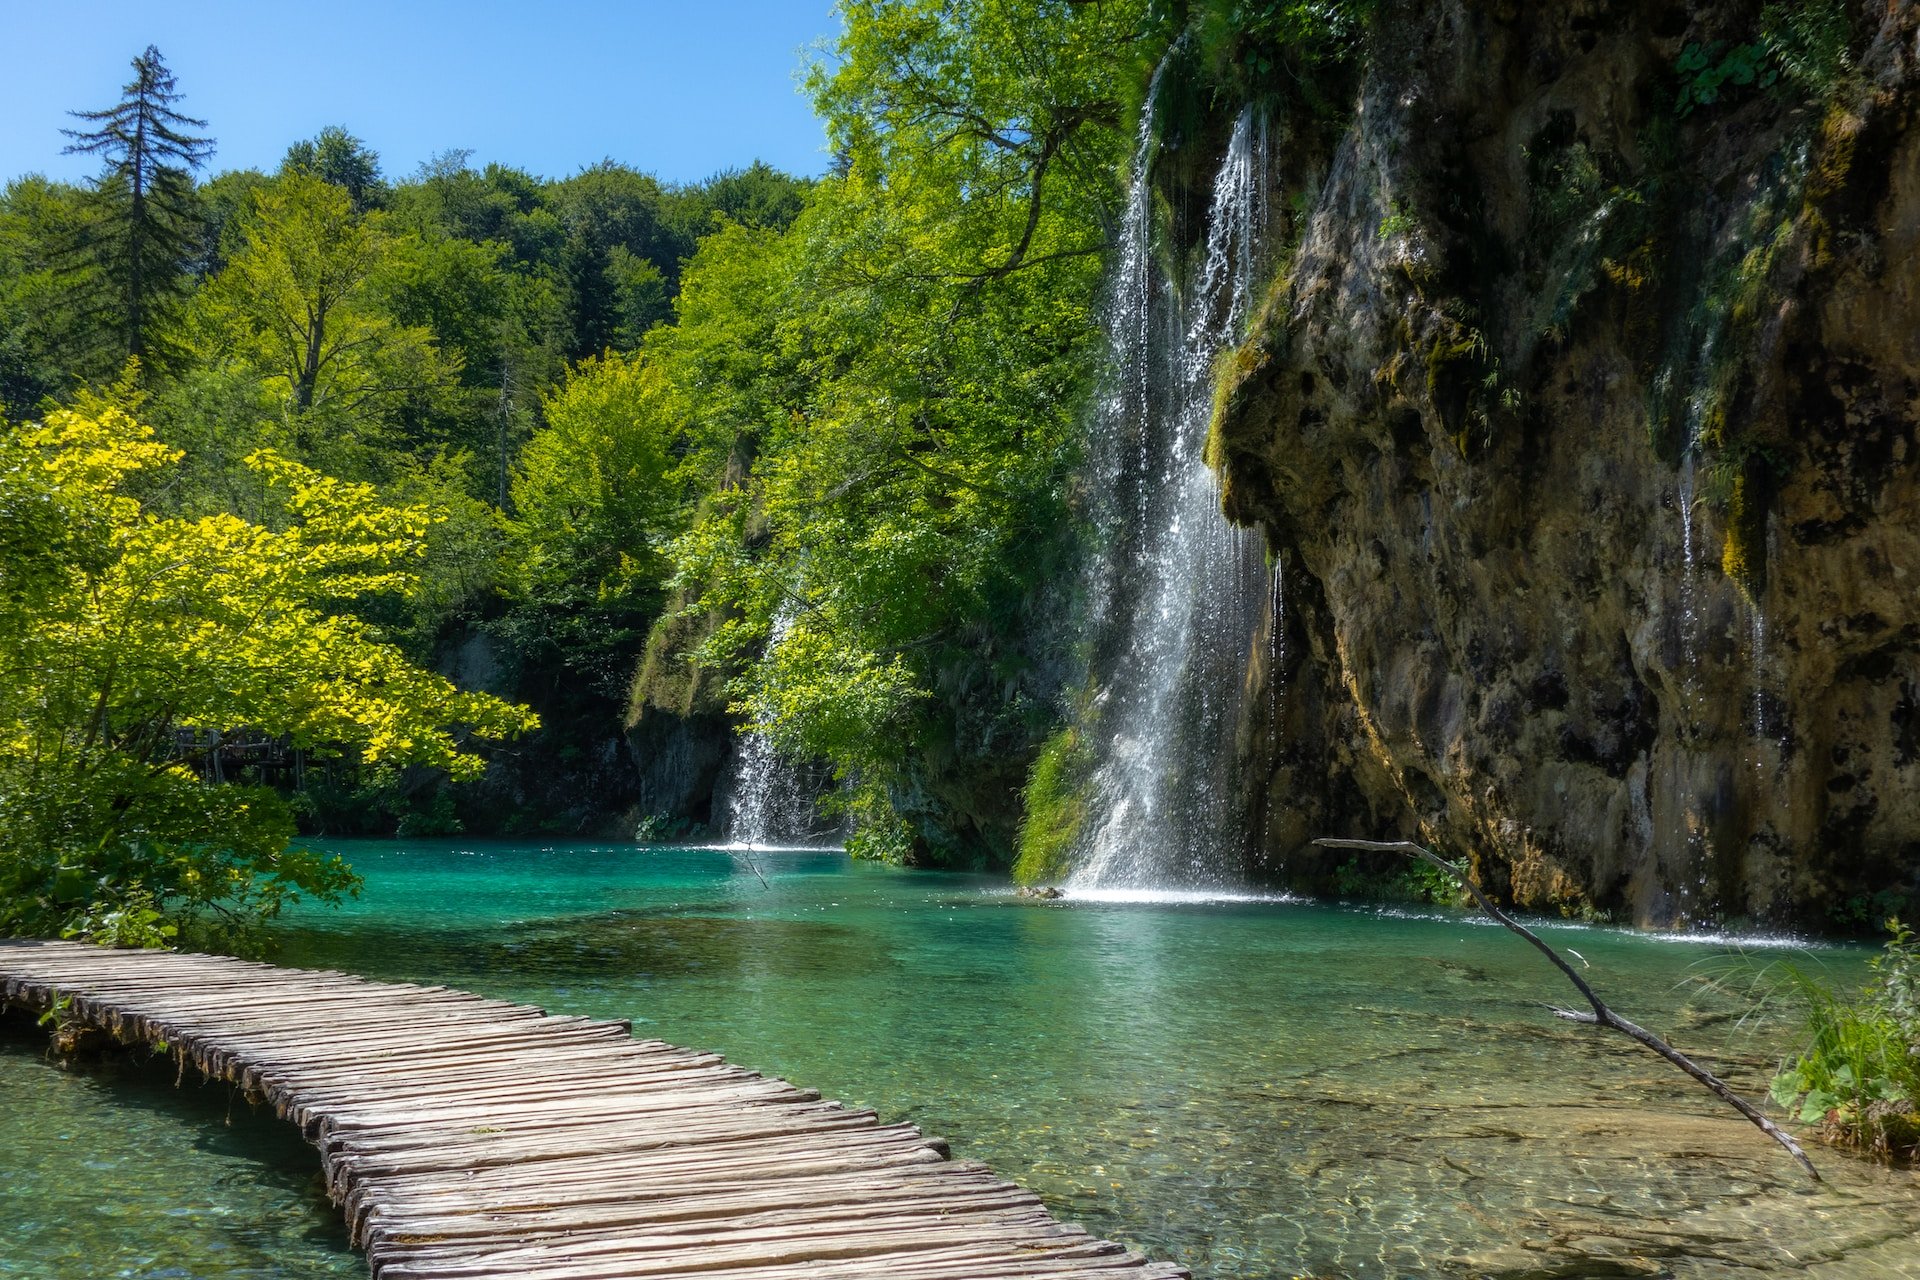 Boardwalk and waterfall in Plitvice Lakes National Park, one of Europe's top national parks (photo: llse)